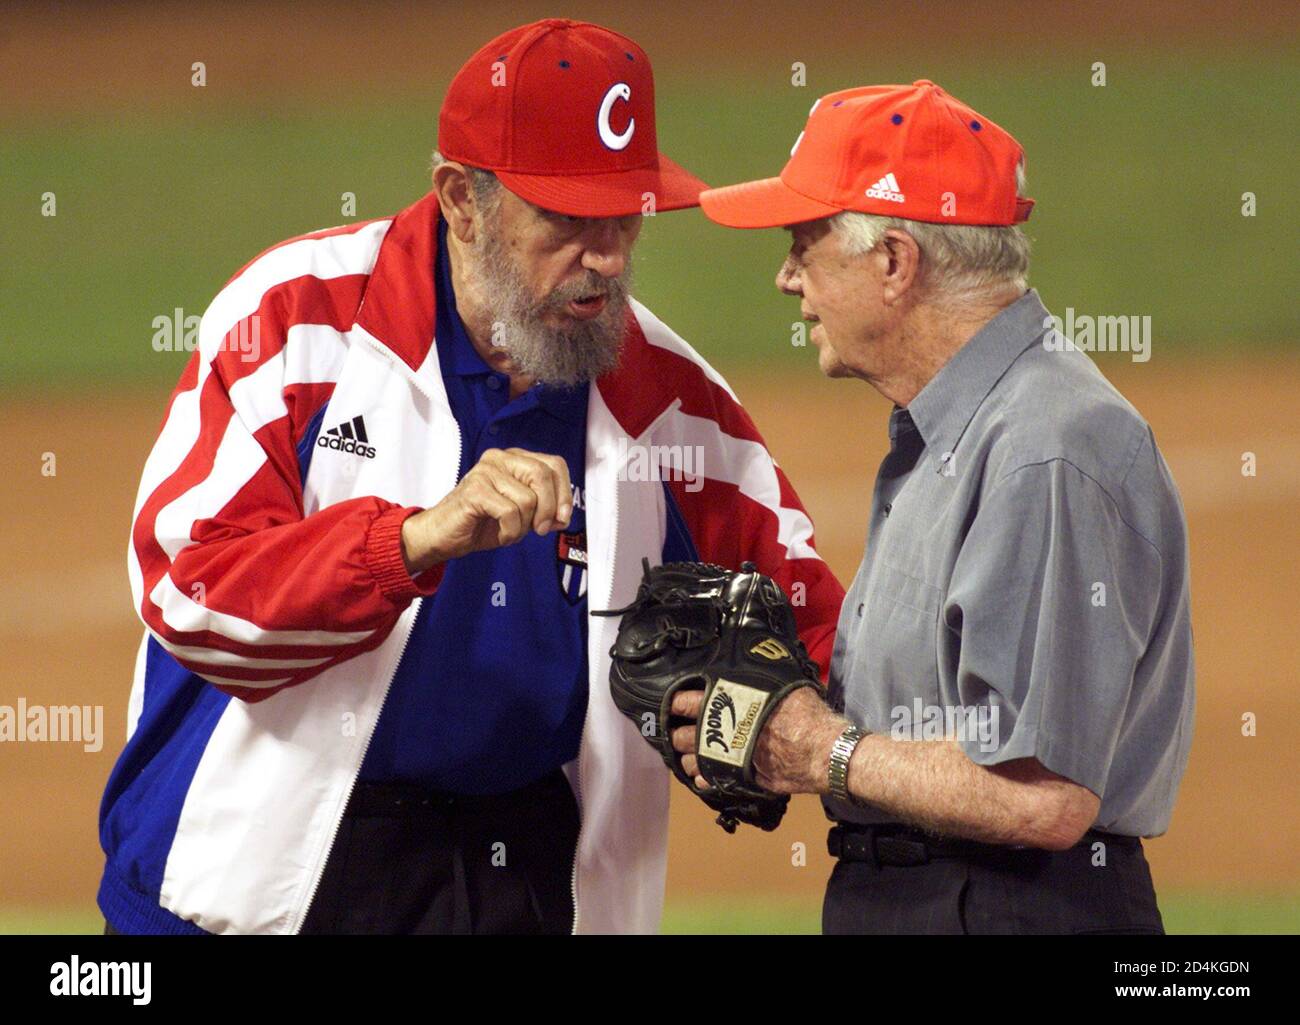 Cuban President Fidel Castro (L) and Former U.S. President Jimmy Carter  wear baseball hats and gloves at a baseball stadium in Havana, in this May  14, 2002 file photo. Castro has given